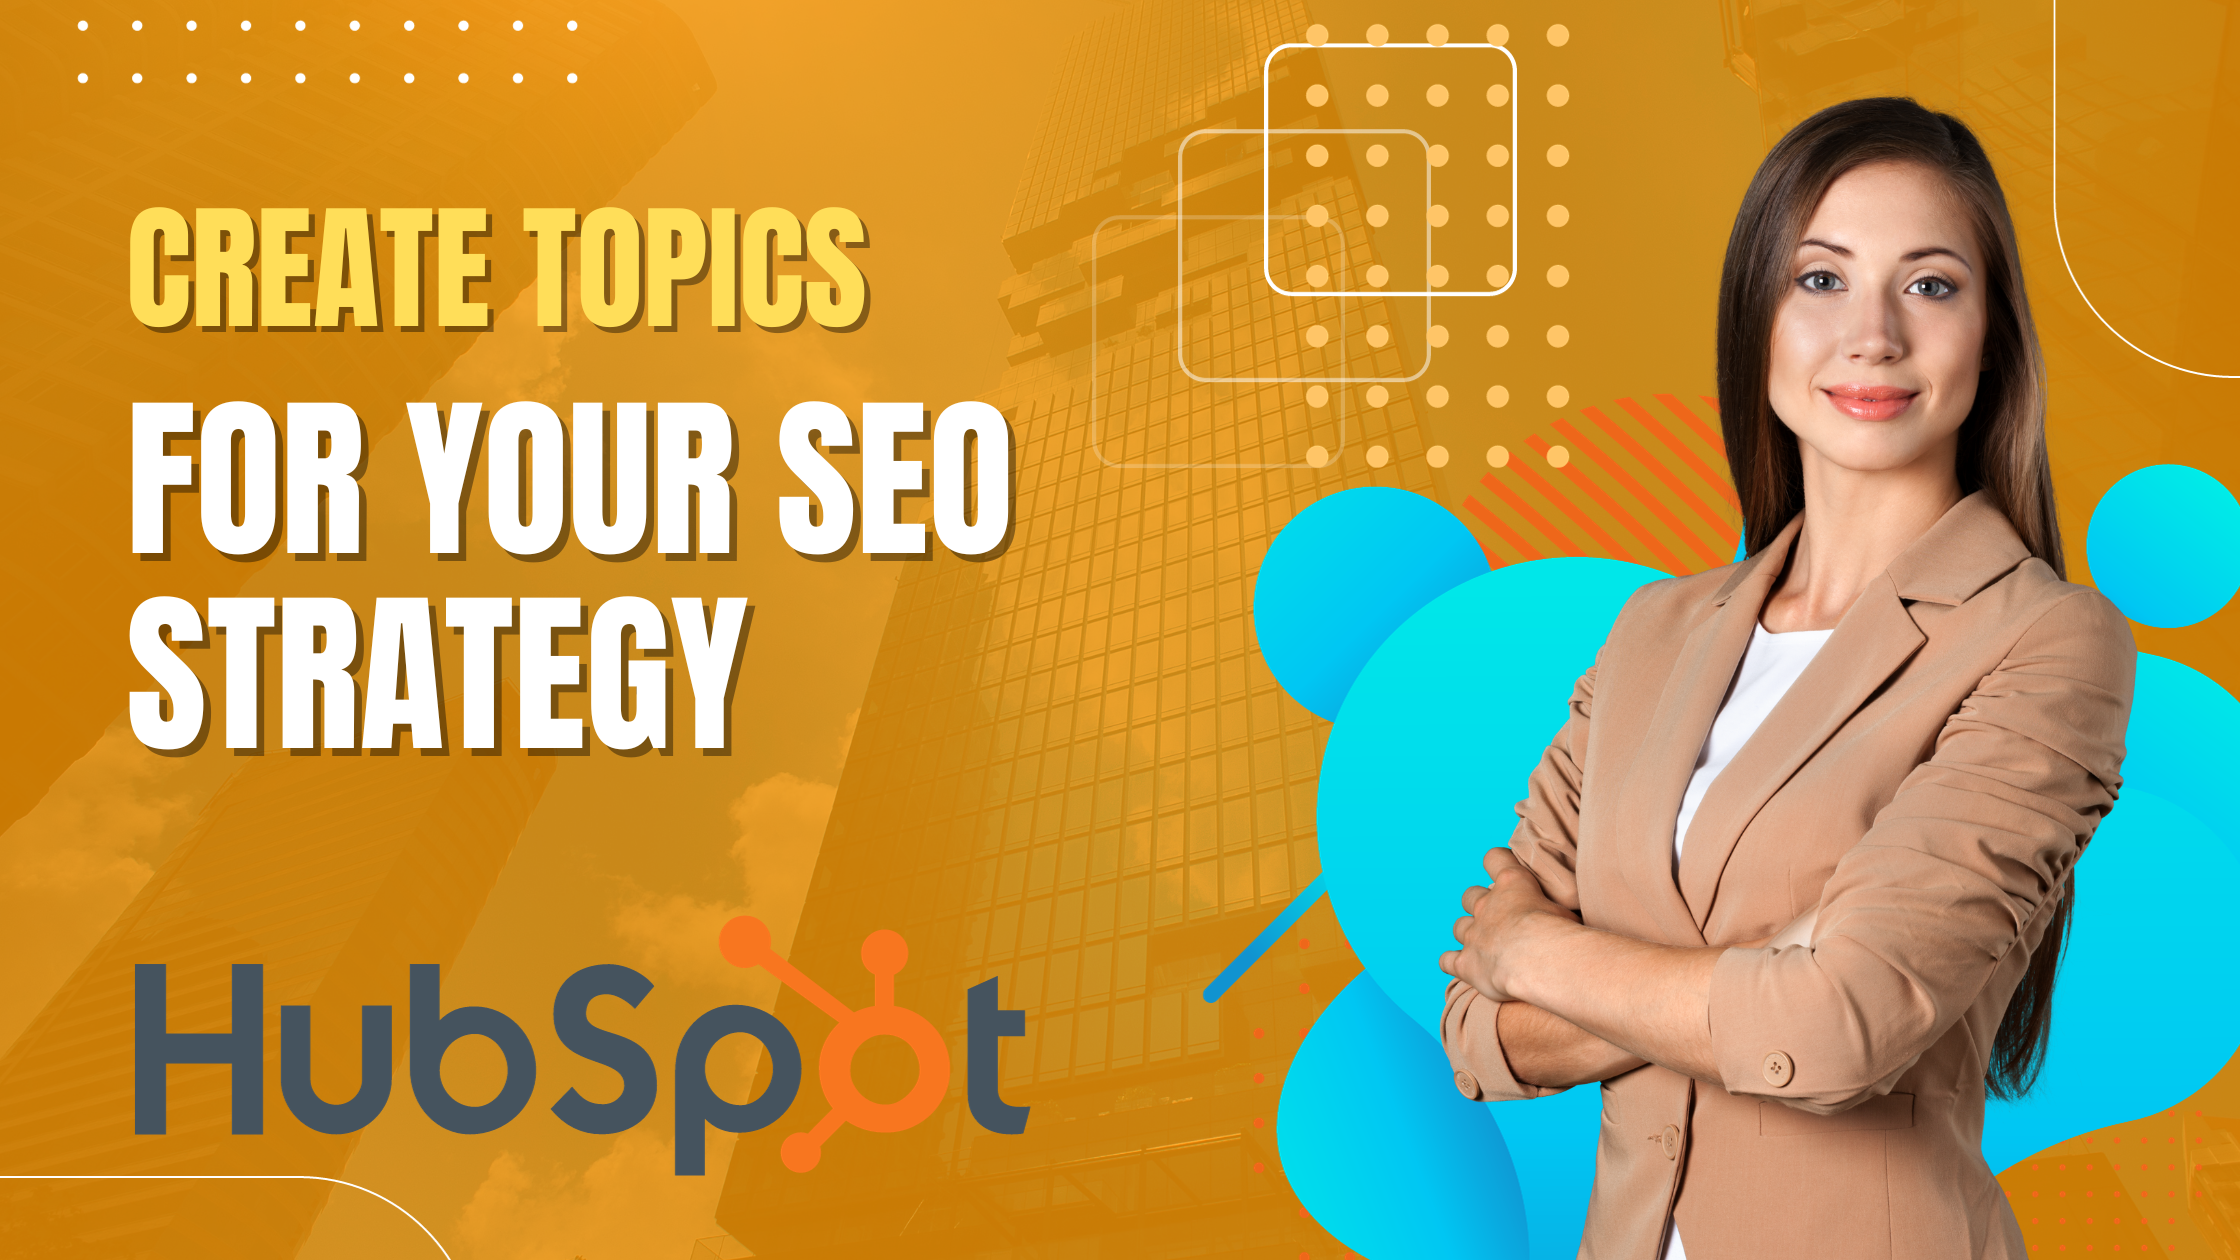 Create topics for your SEO strategy